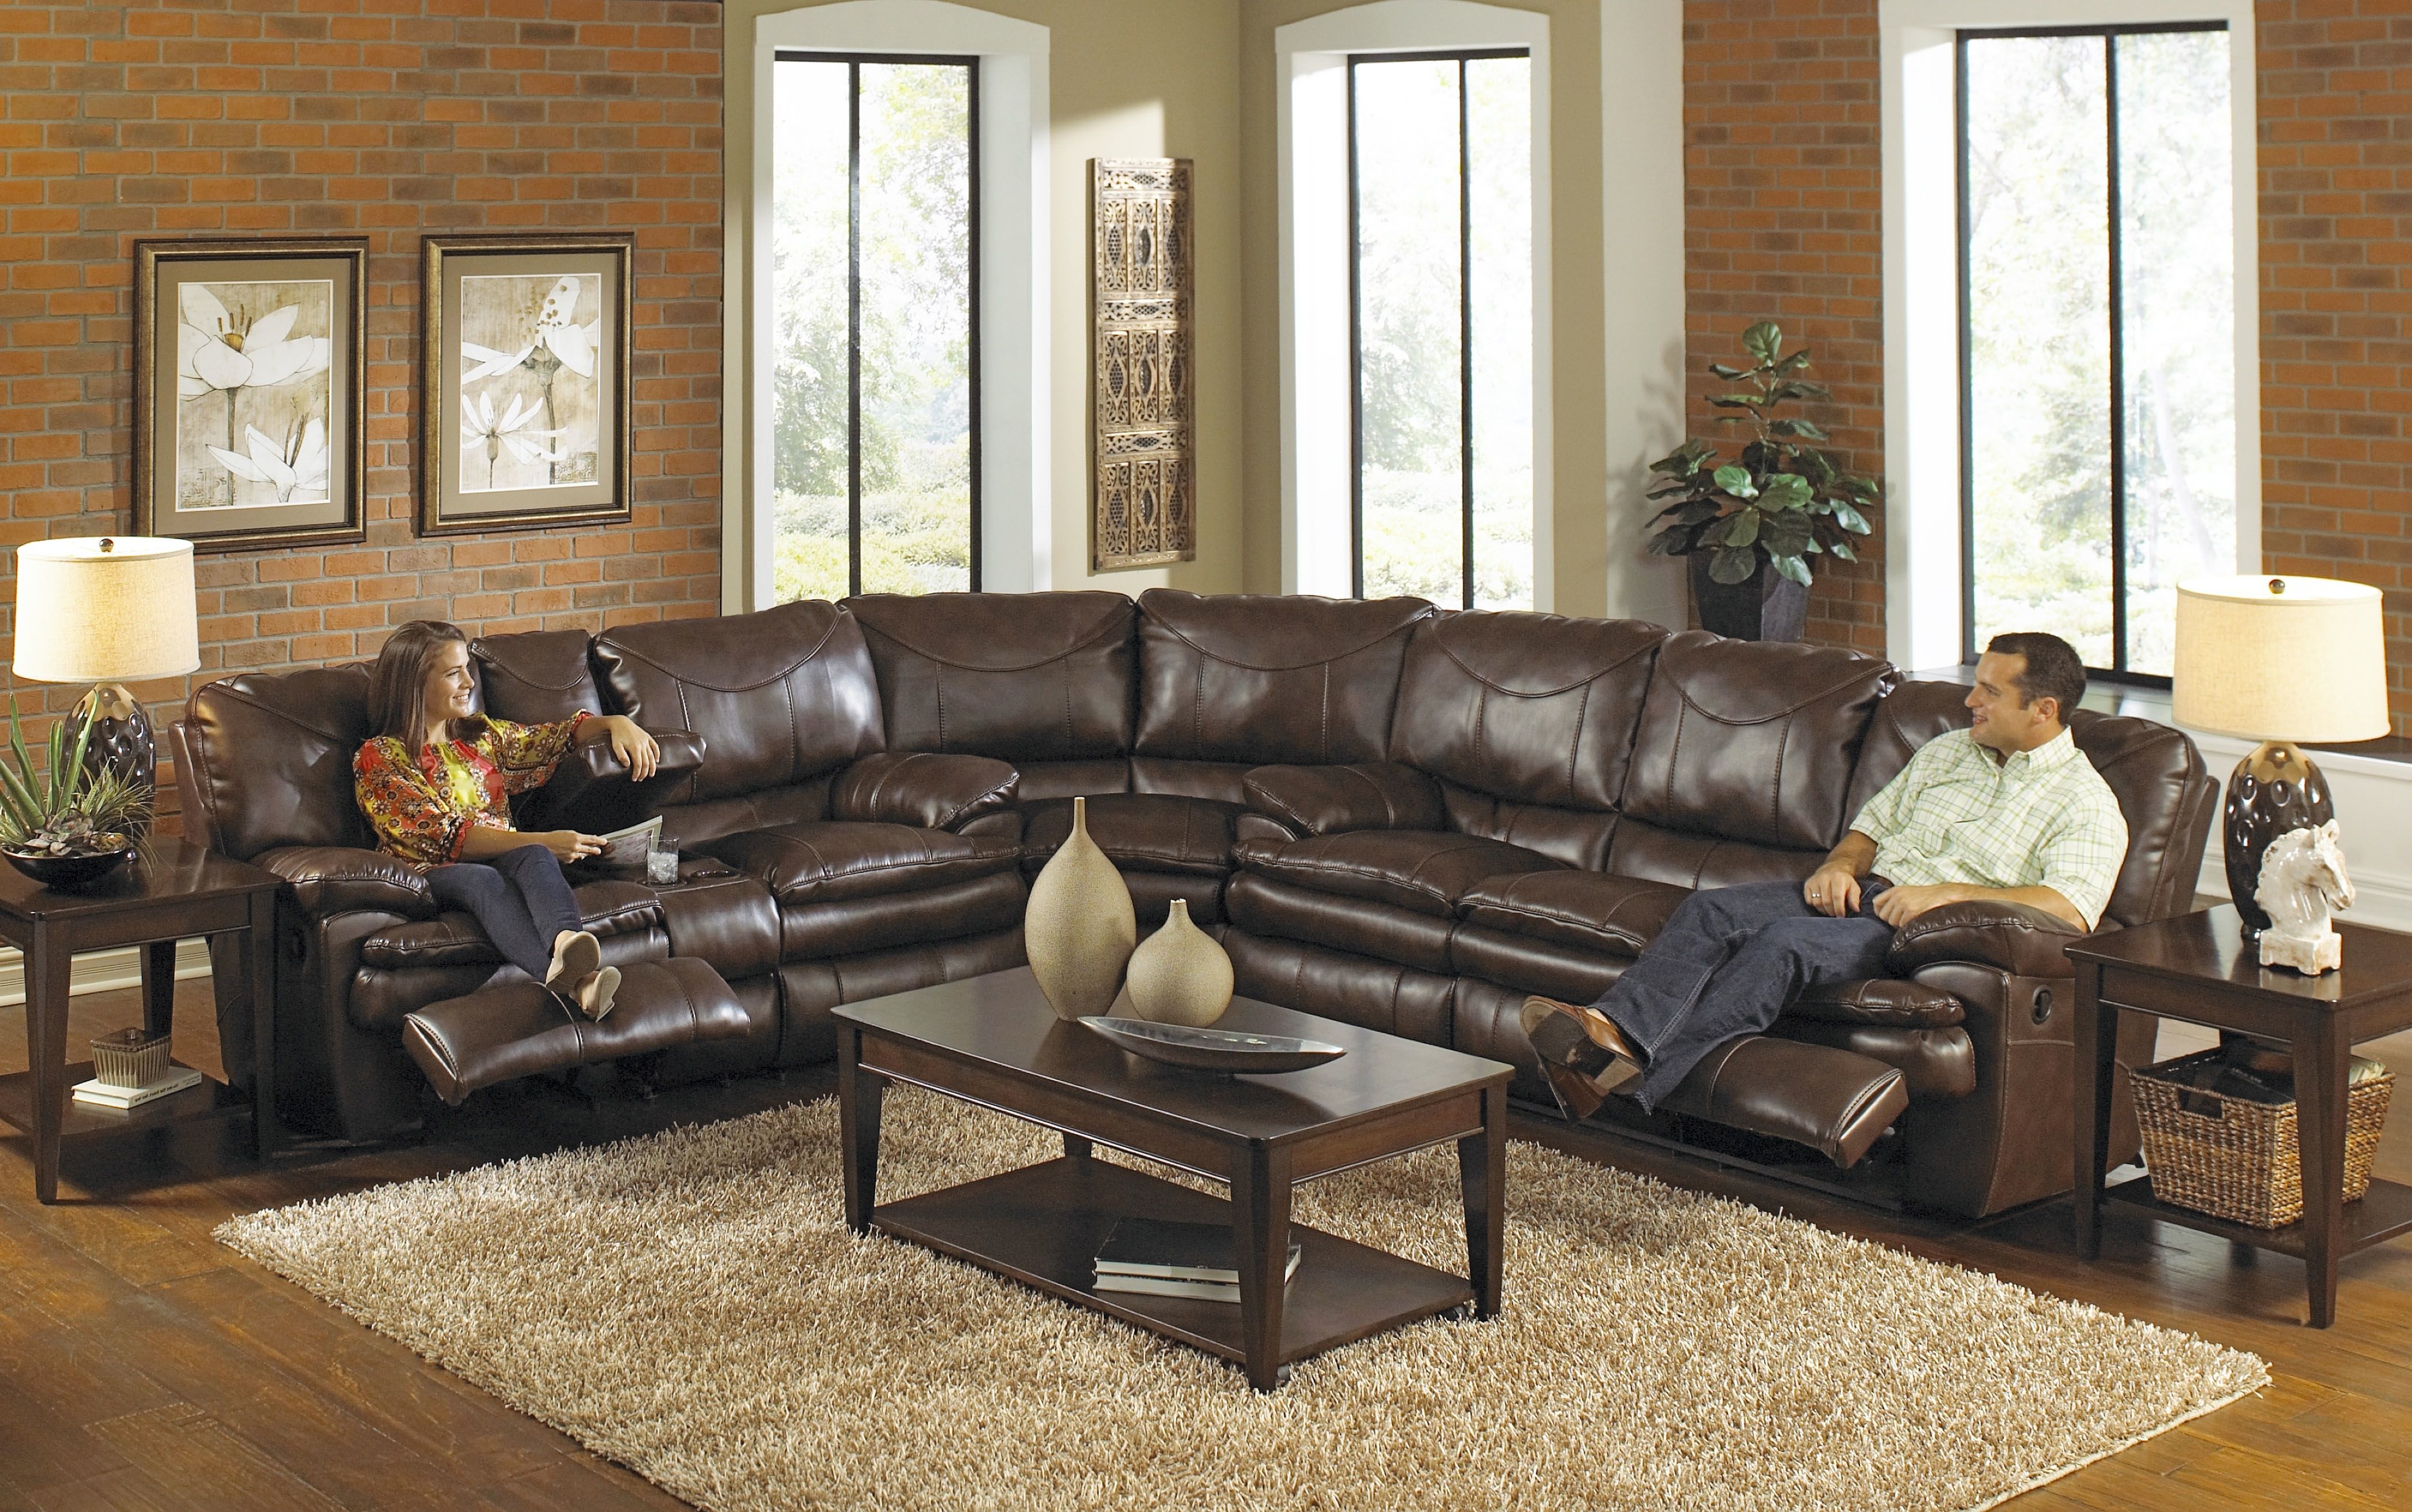 Most Recent Sectional Sofas With Recliners Leather For Delivered Sofa With Chaise And Recliner Buy Large Sectional Sofas (View 4 of 15)